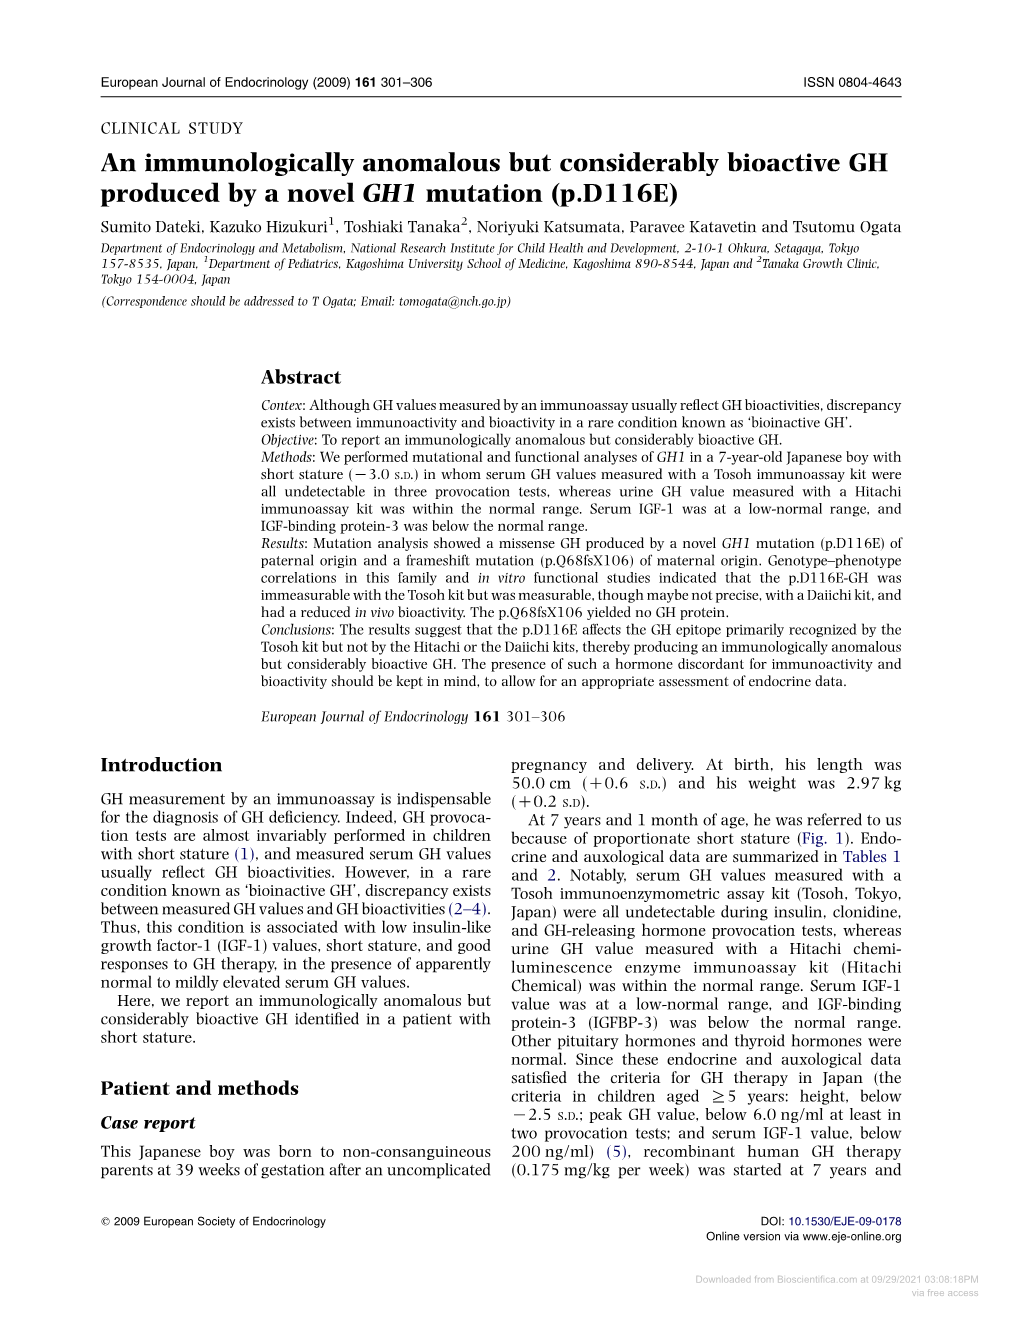 An Immunologically Anomalous but Considerably Bioactive GH